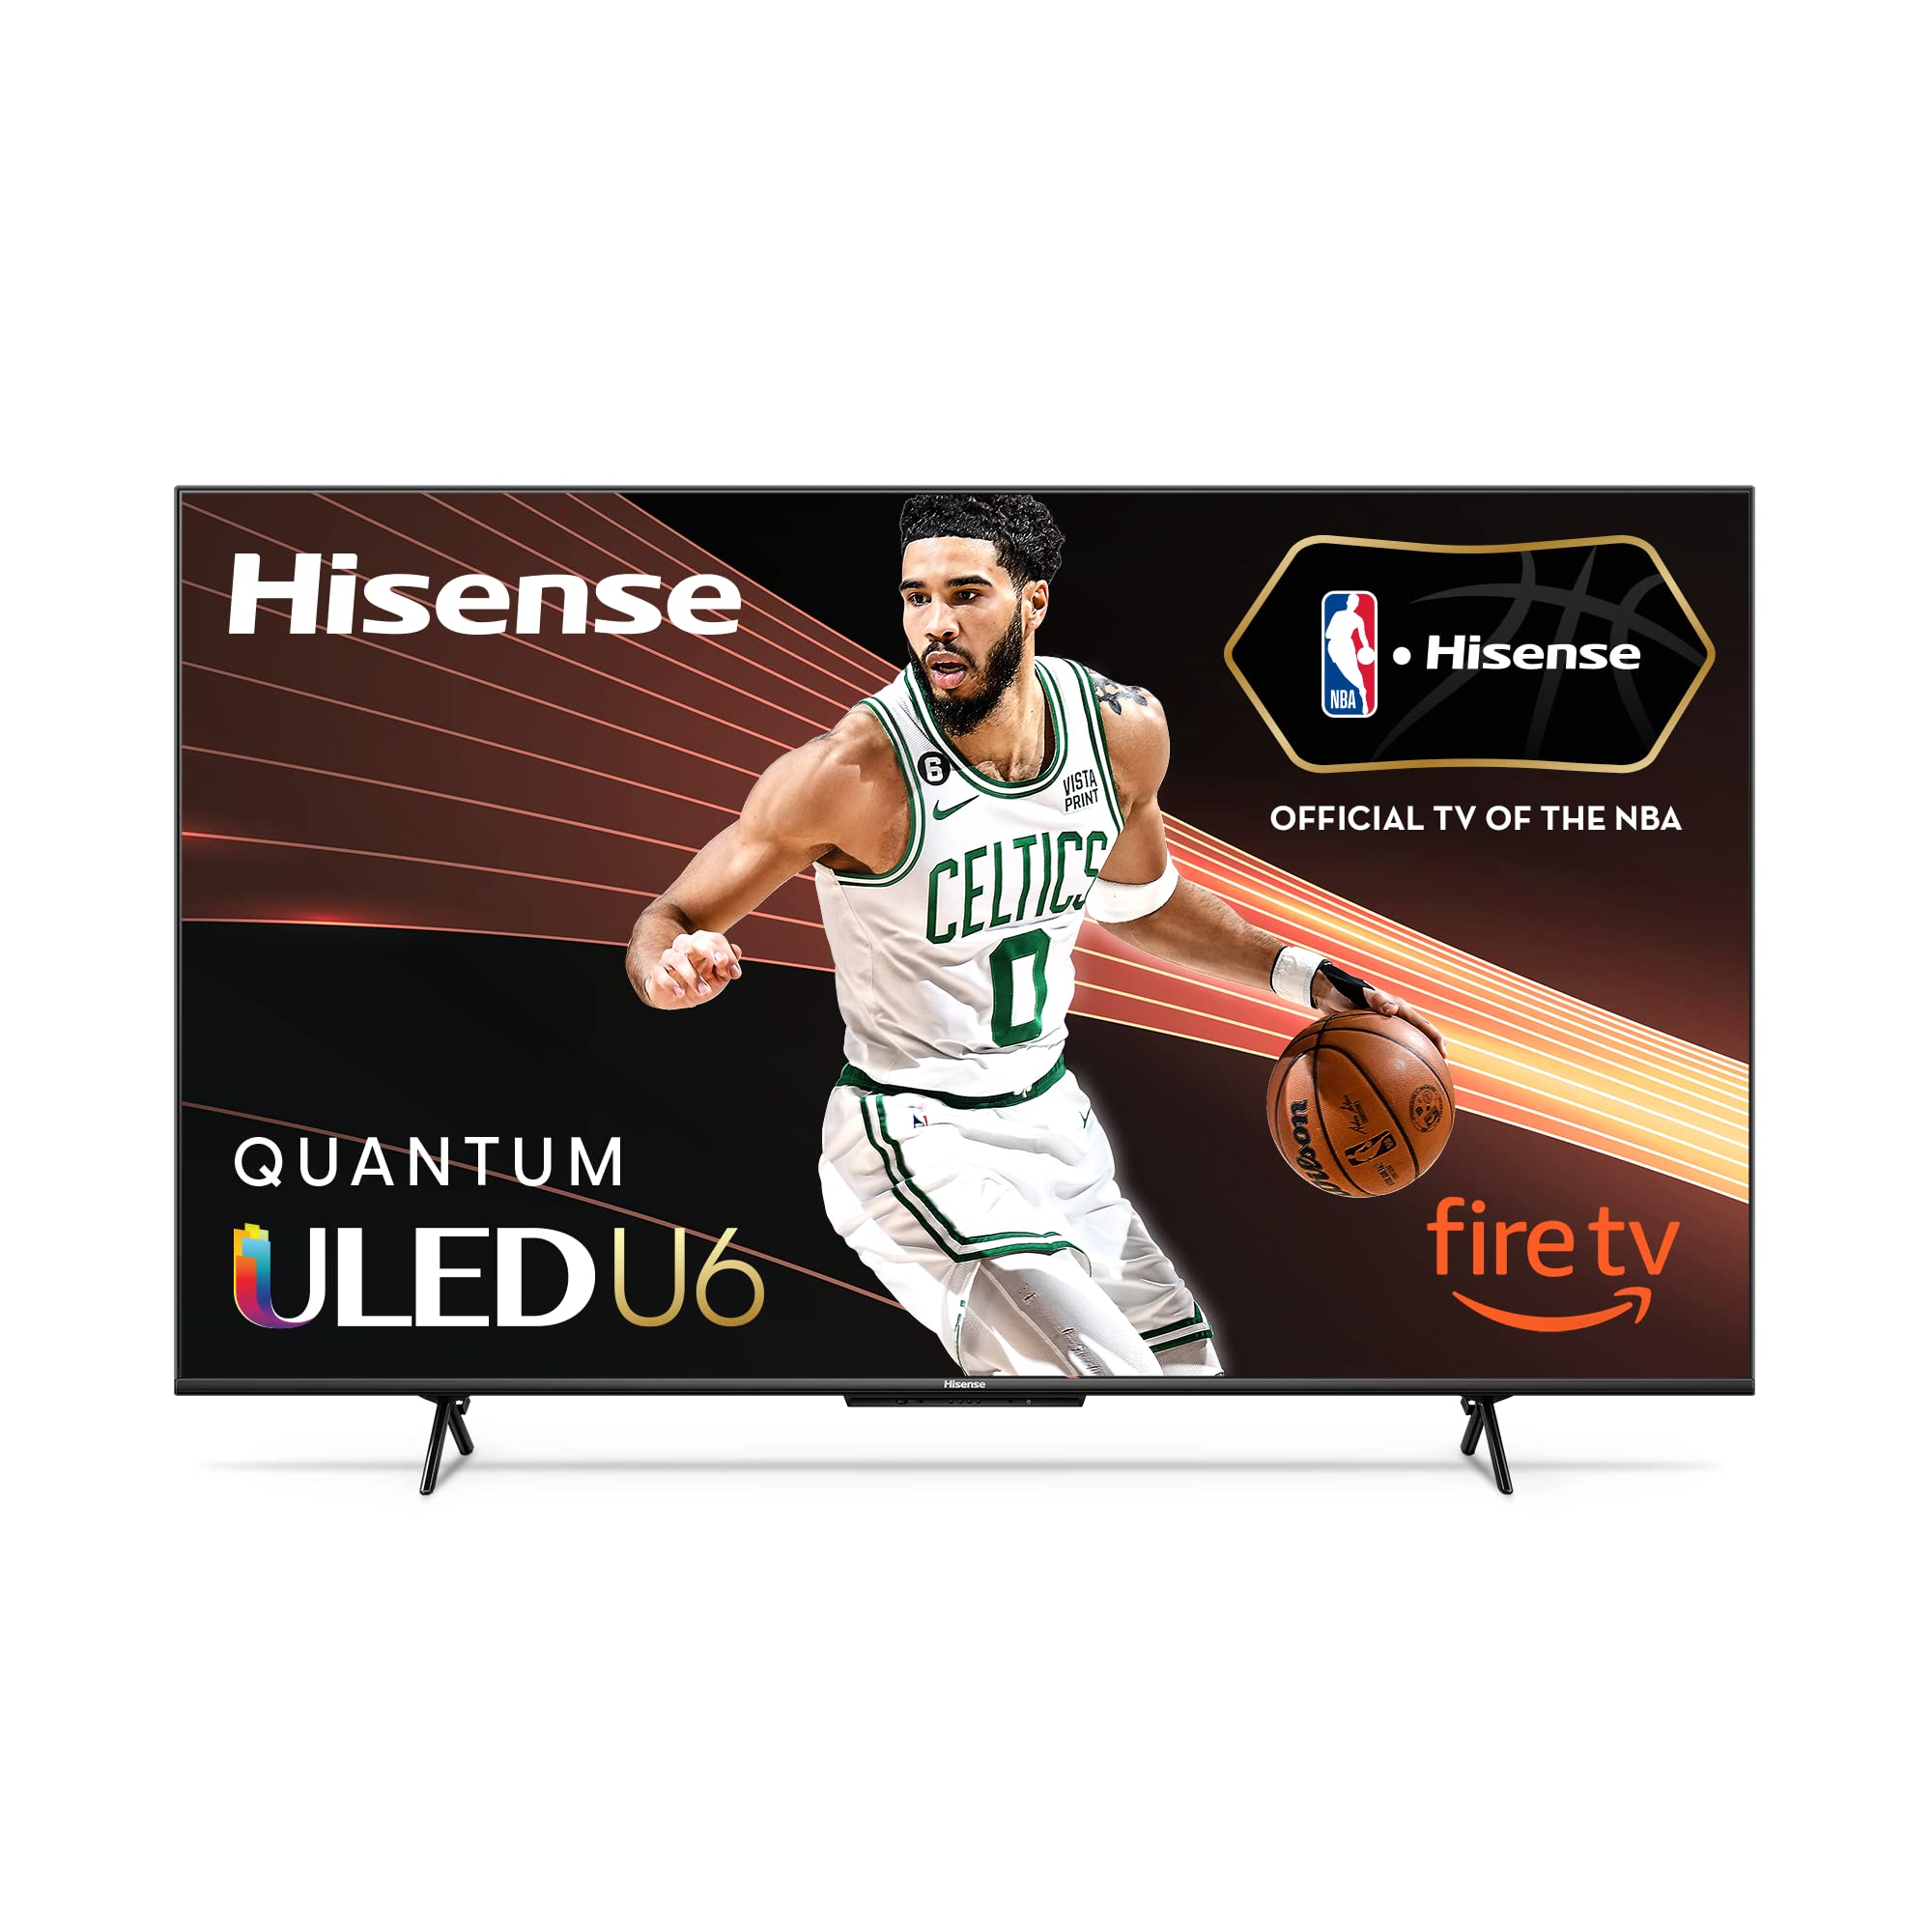 Hisense 58-Inch Class U6HF Series ULED 4K UHD Smart Fire TV (58U6HF) - QLED, 600-Nit Dolby Vision, HDR 10 plus, 240 Motion Rate, Voice Remote, Compatible with Alexa, Black $349.99